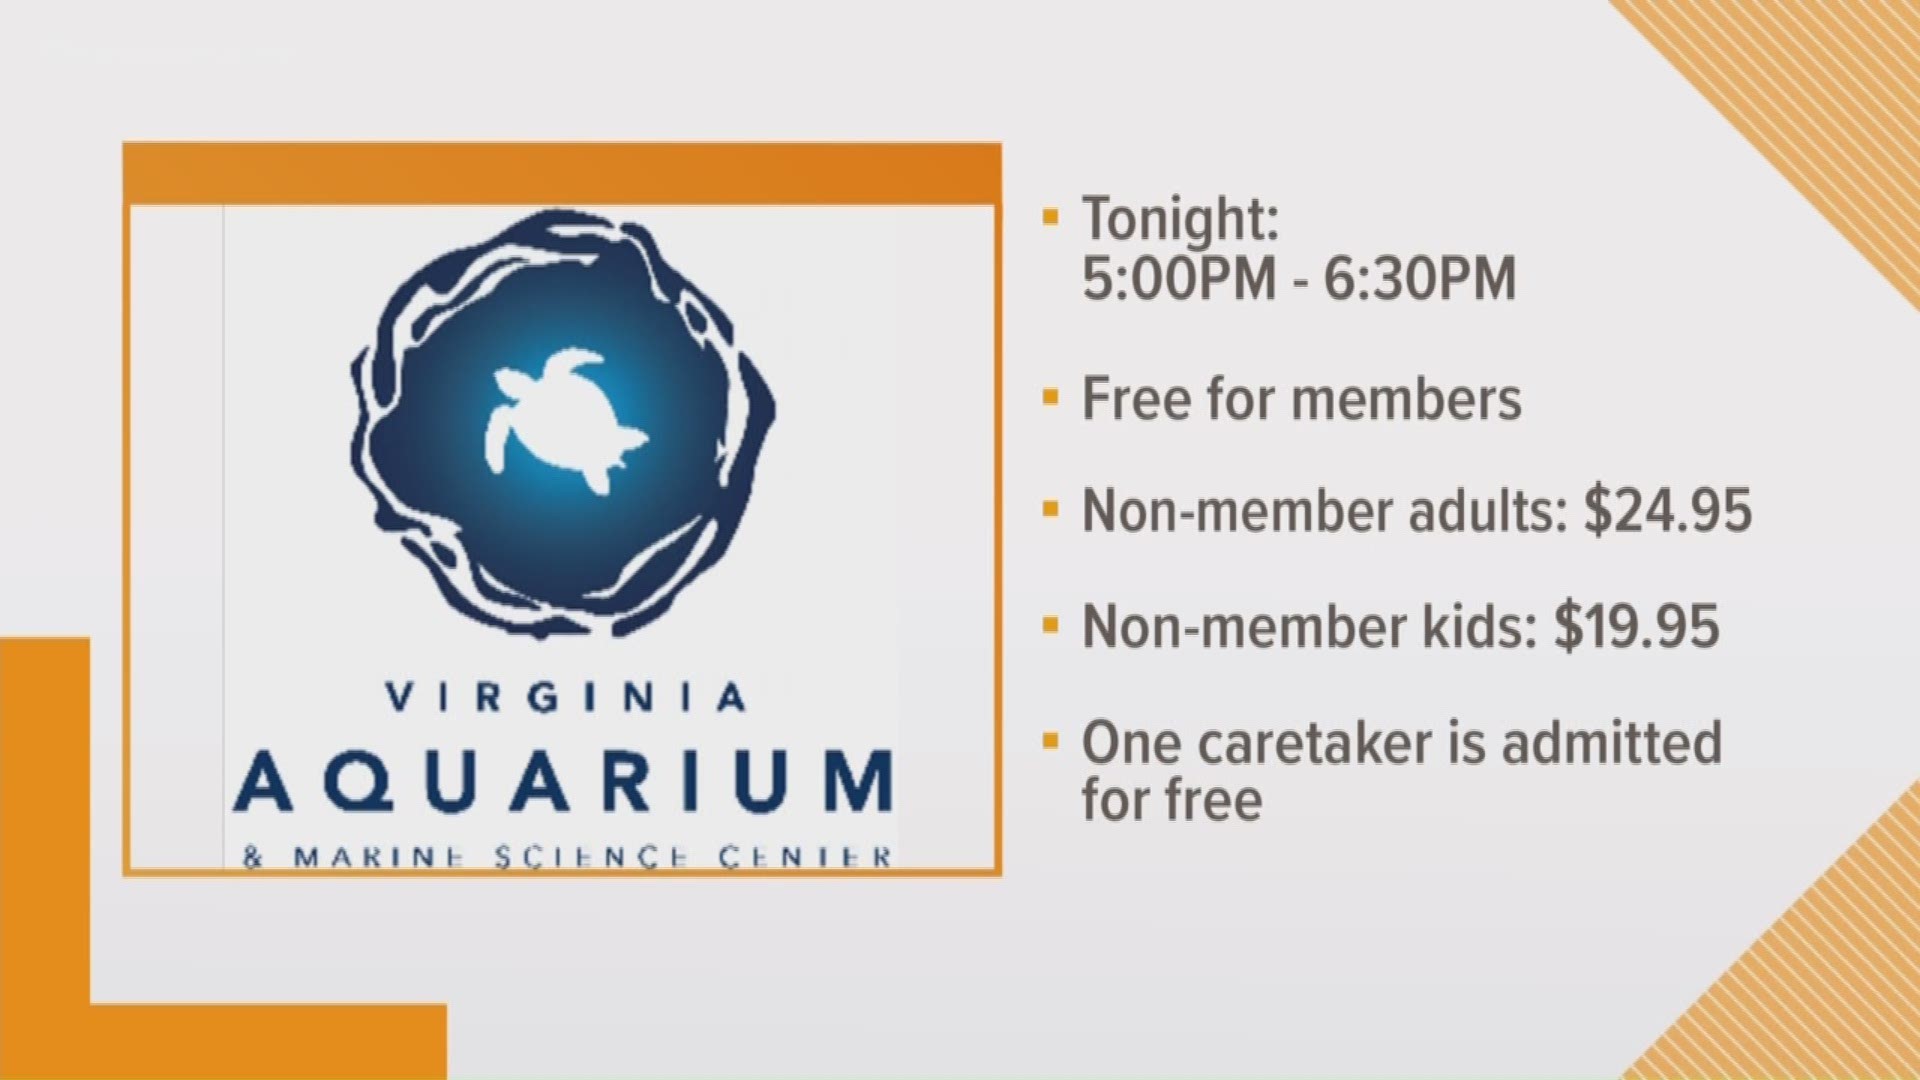 The Virginia Aquarium is hosting a special needs under the sea event on May 22.